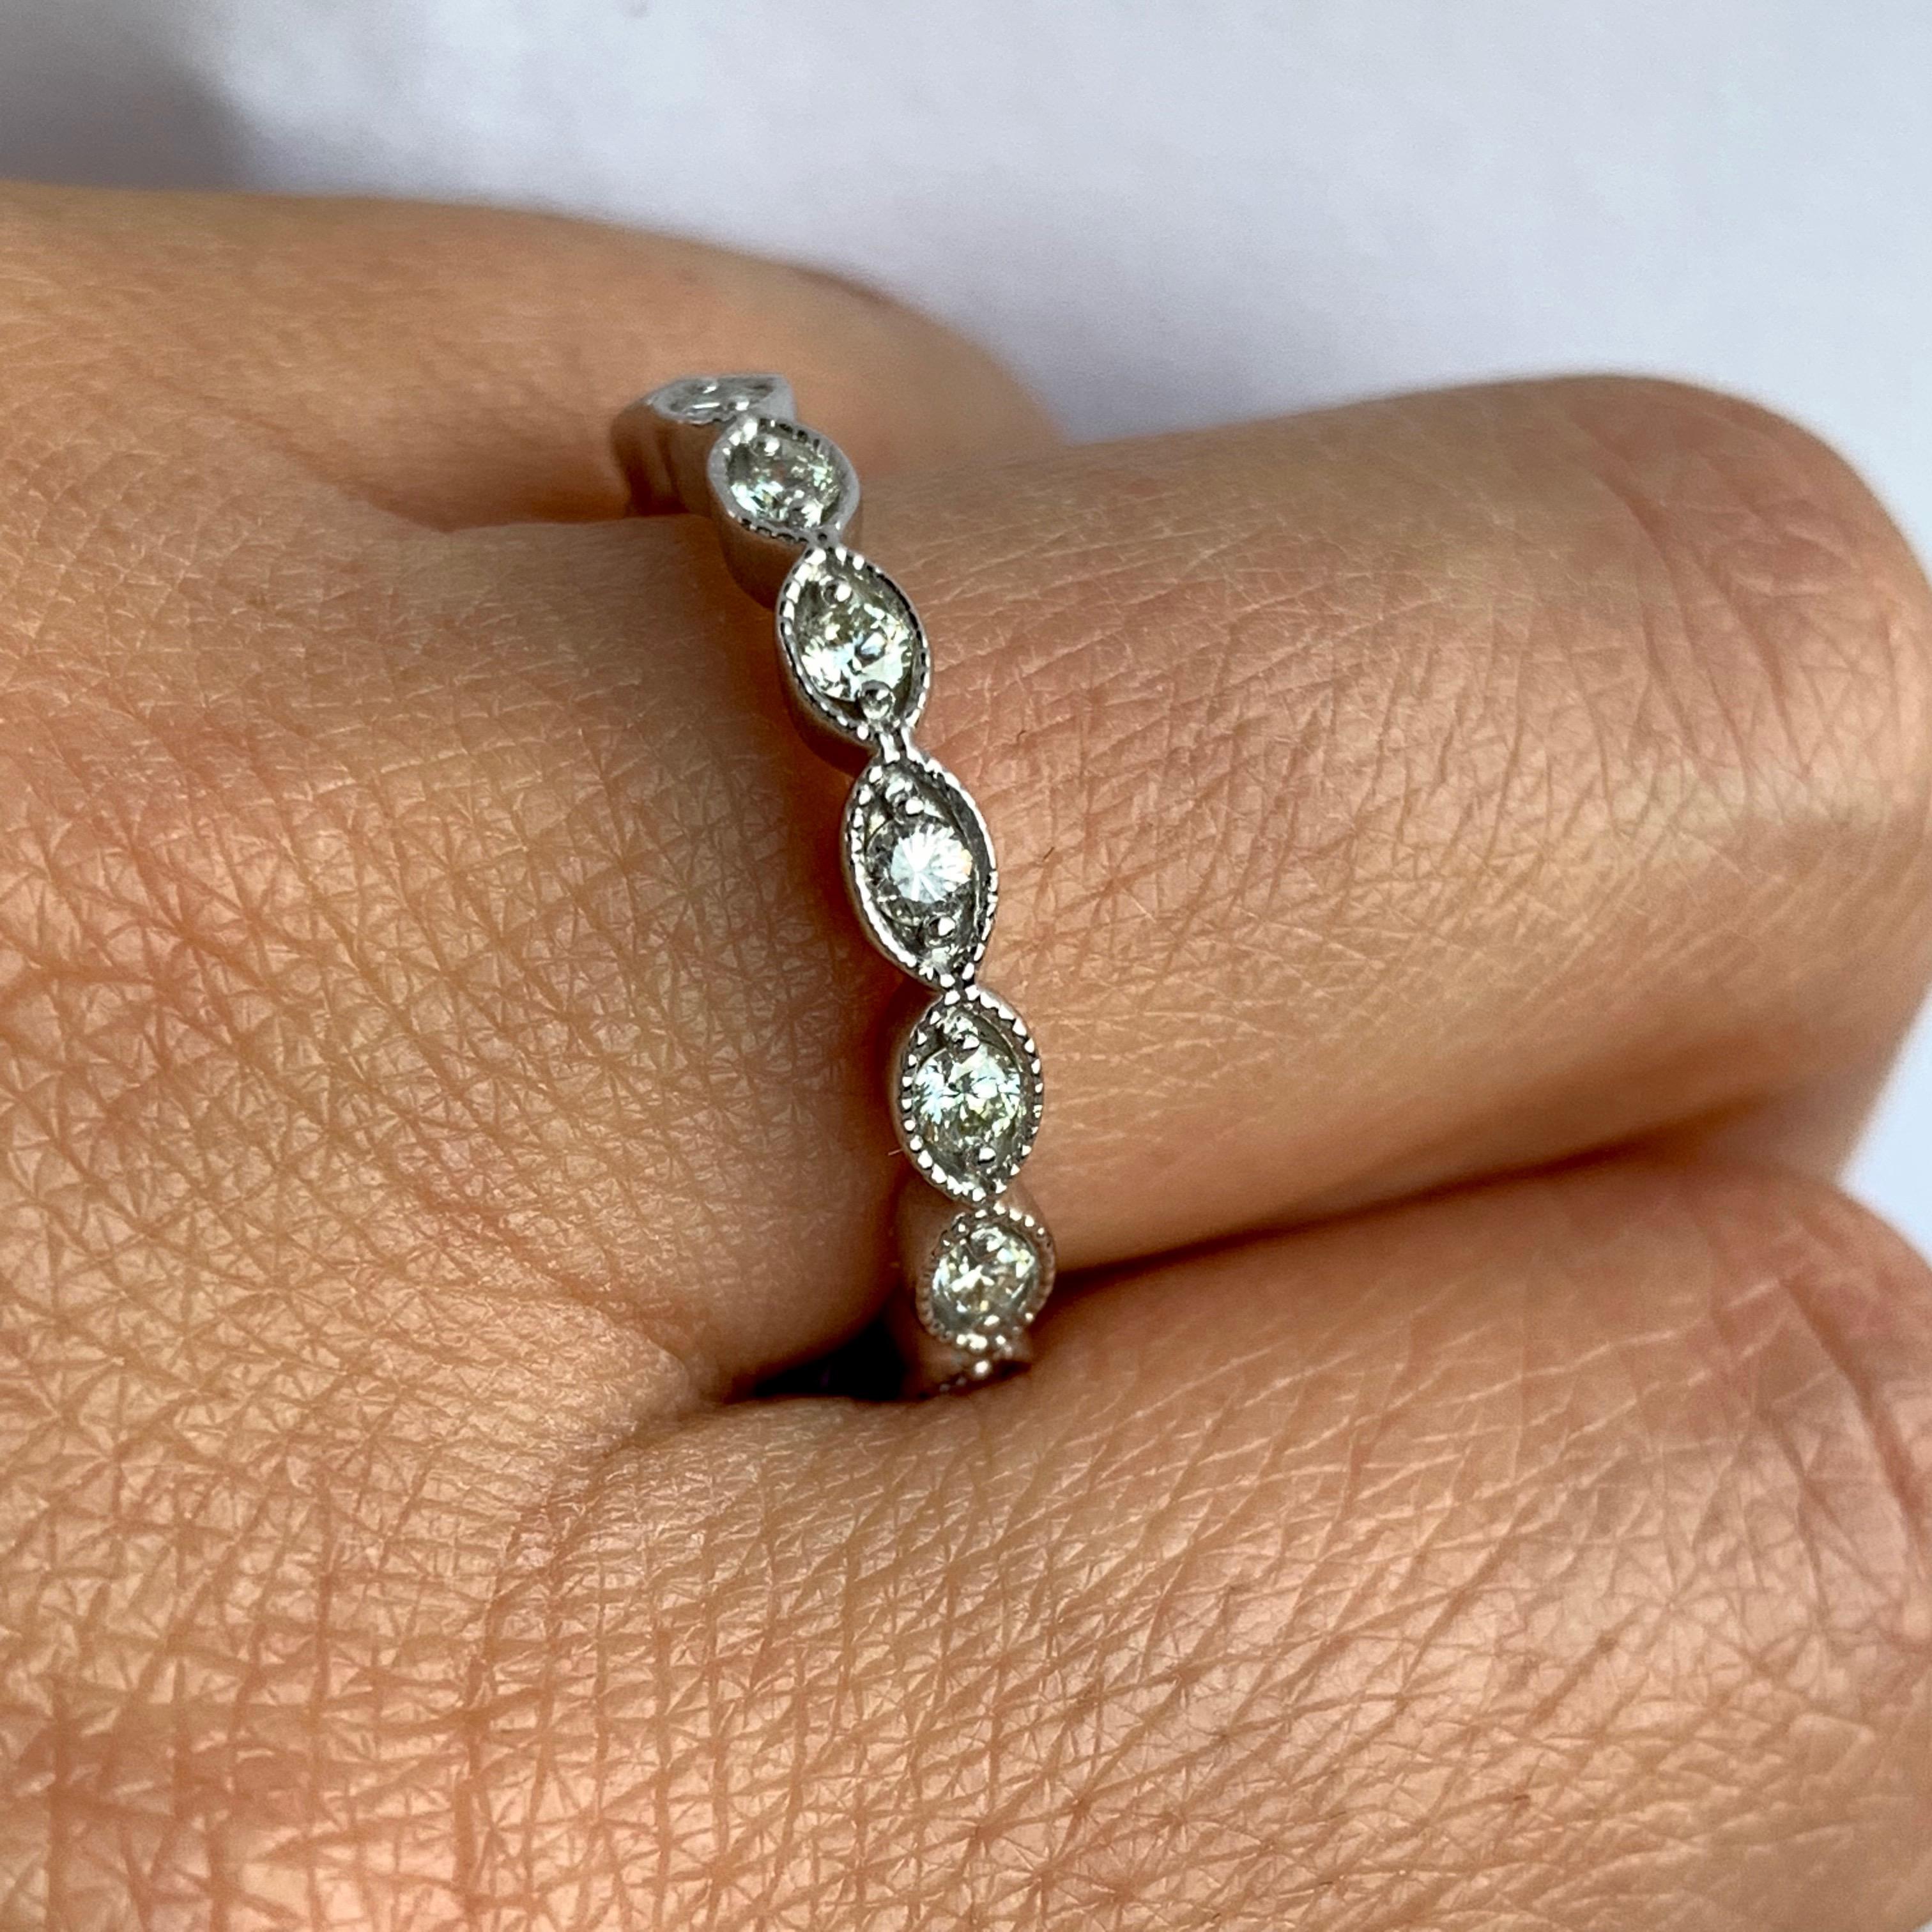 Material: 14k White Gold
Center Stone Details: 10 Brilliant Round White Diamonds at 0.40 Carats - Clarity: SI / Color: H-I
Ring Size: Size 6.75. Alberto offers complimentary sizing on all rings.

Fine one-of-a-kind craftsmanship meets incredible